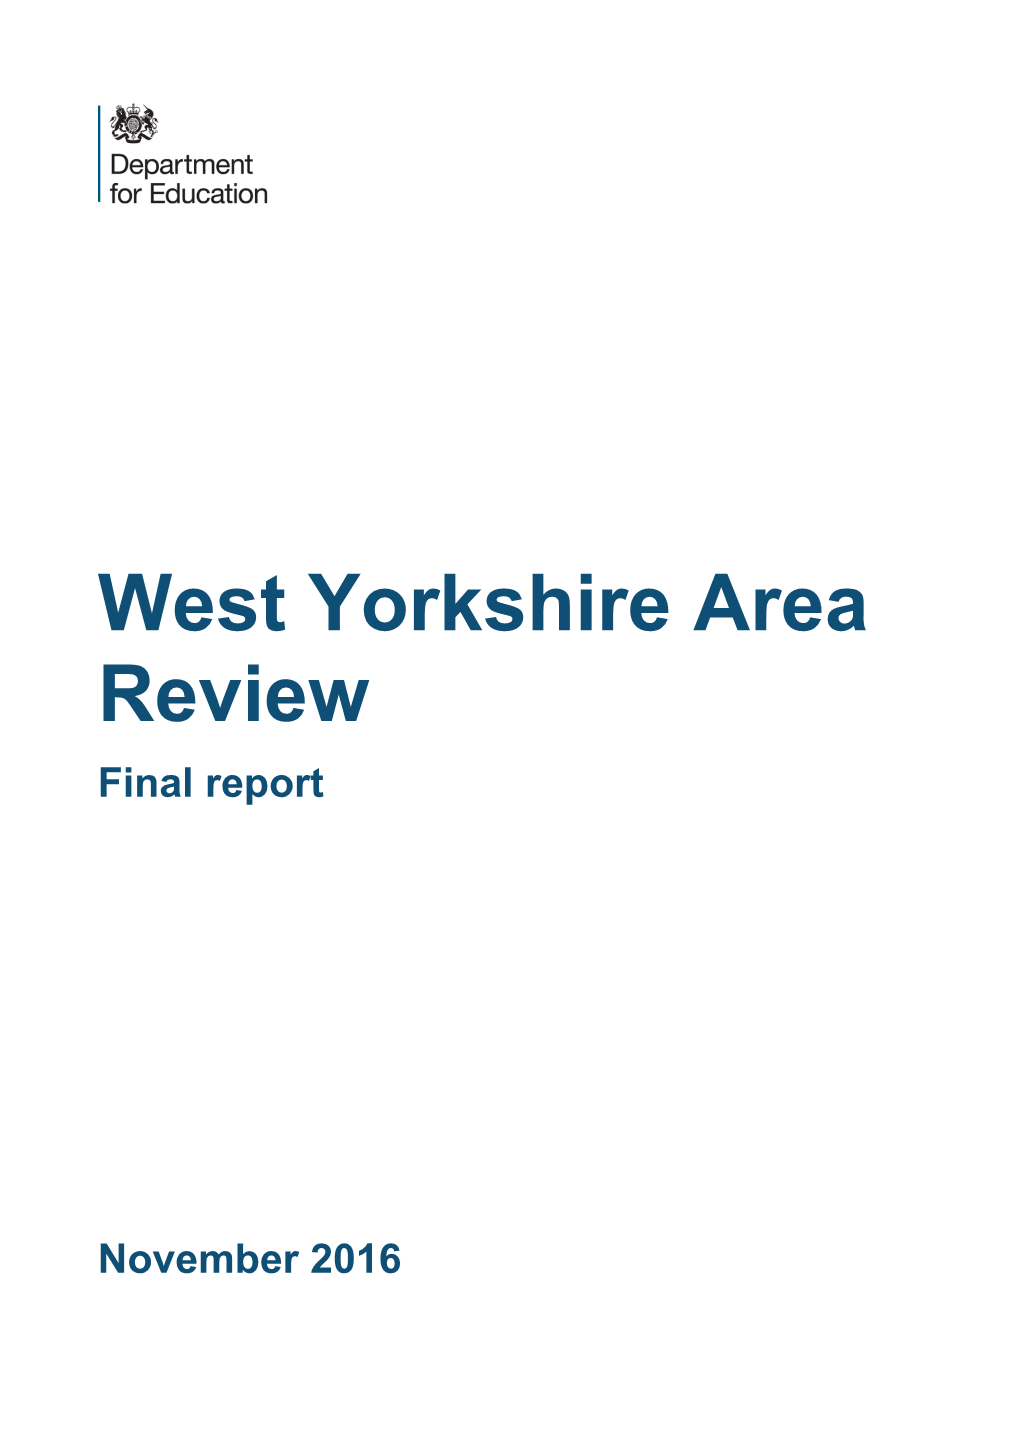 West Yorkshire Area Review Final Report